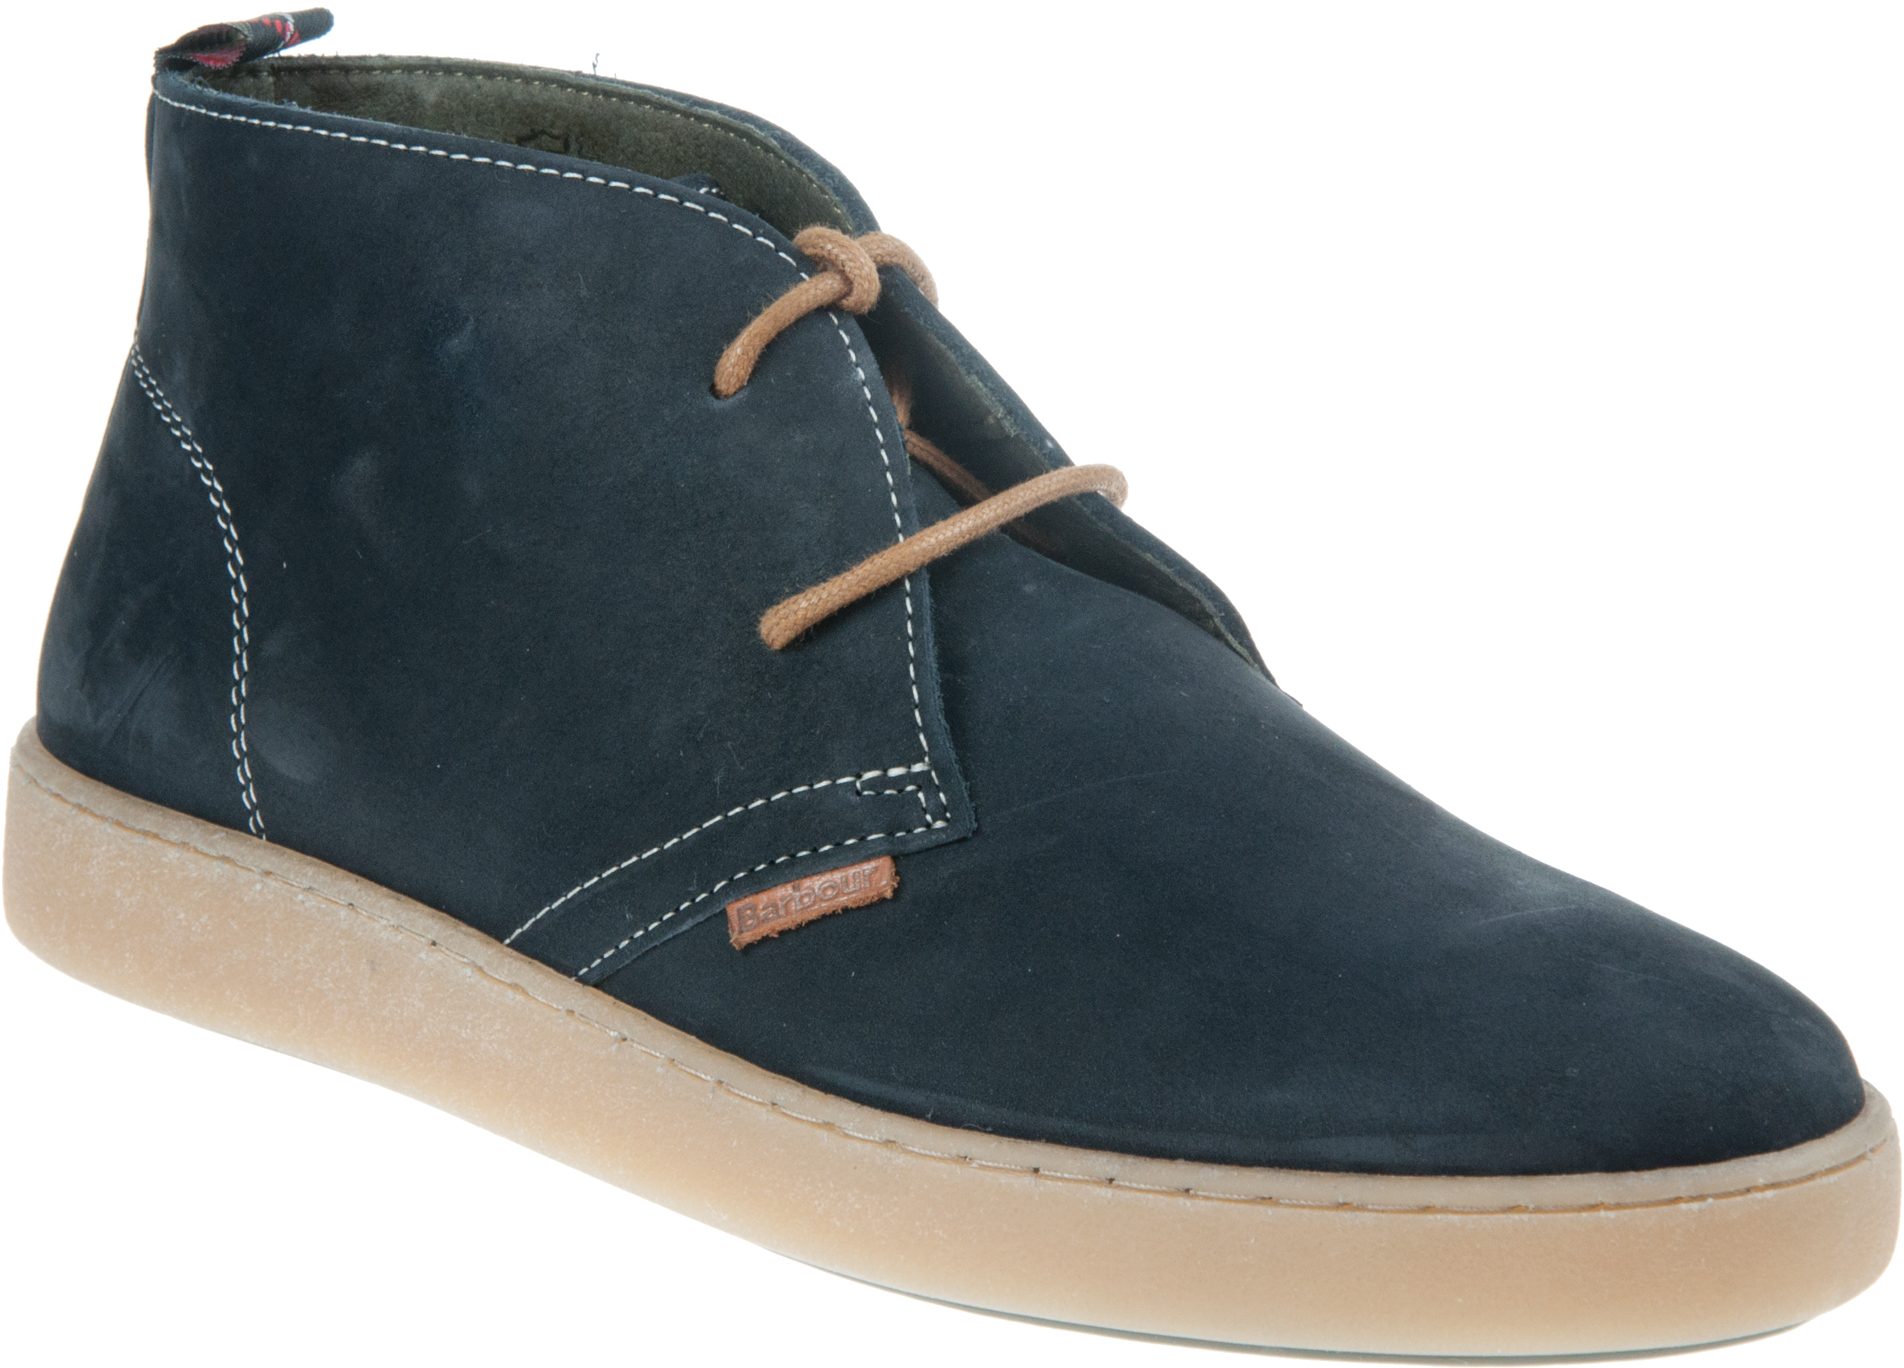 Barbour Yuma Navy Nubuck MFO0591NY11 - Casual Boots - Humphries Shoes